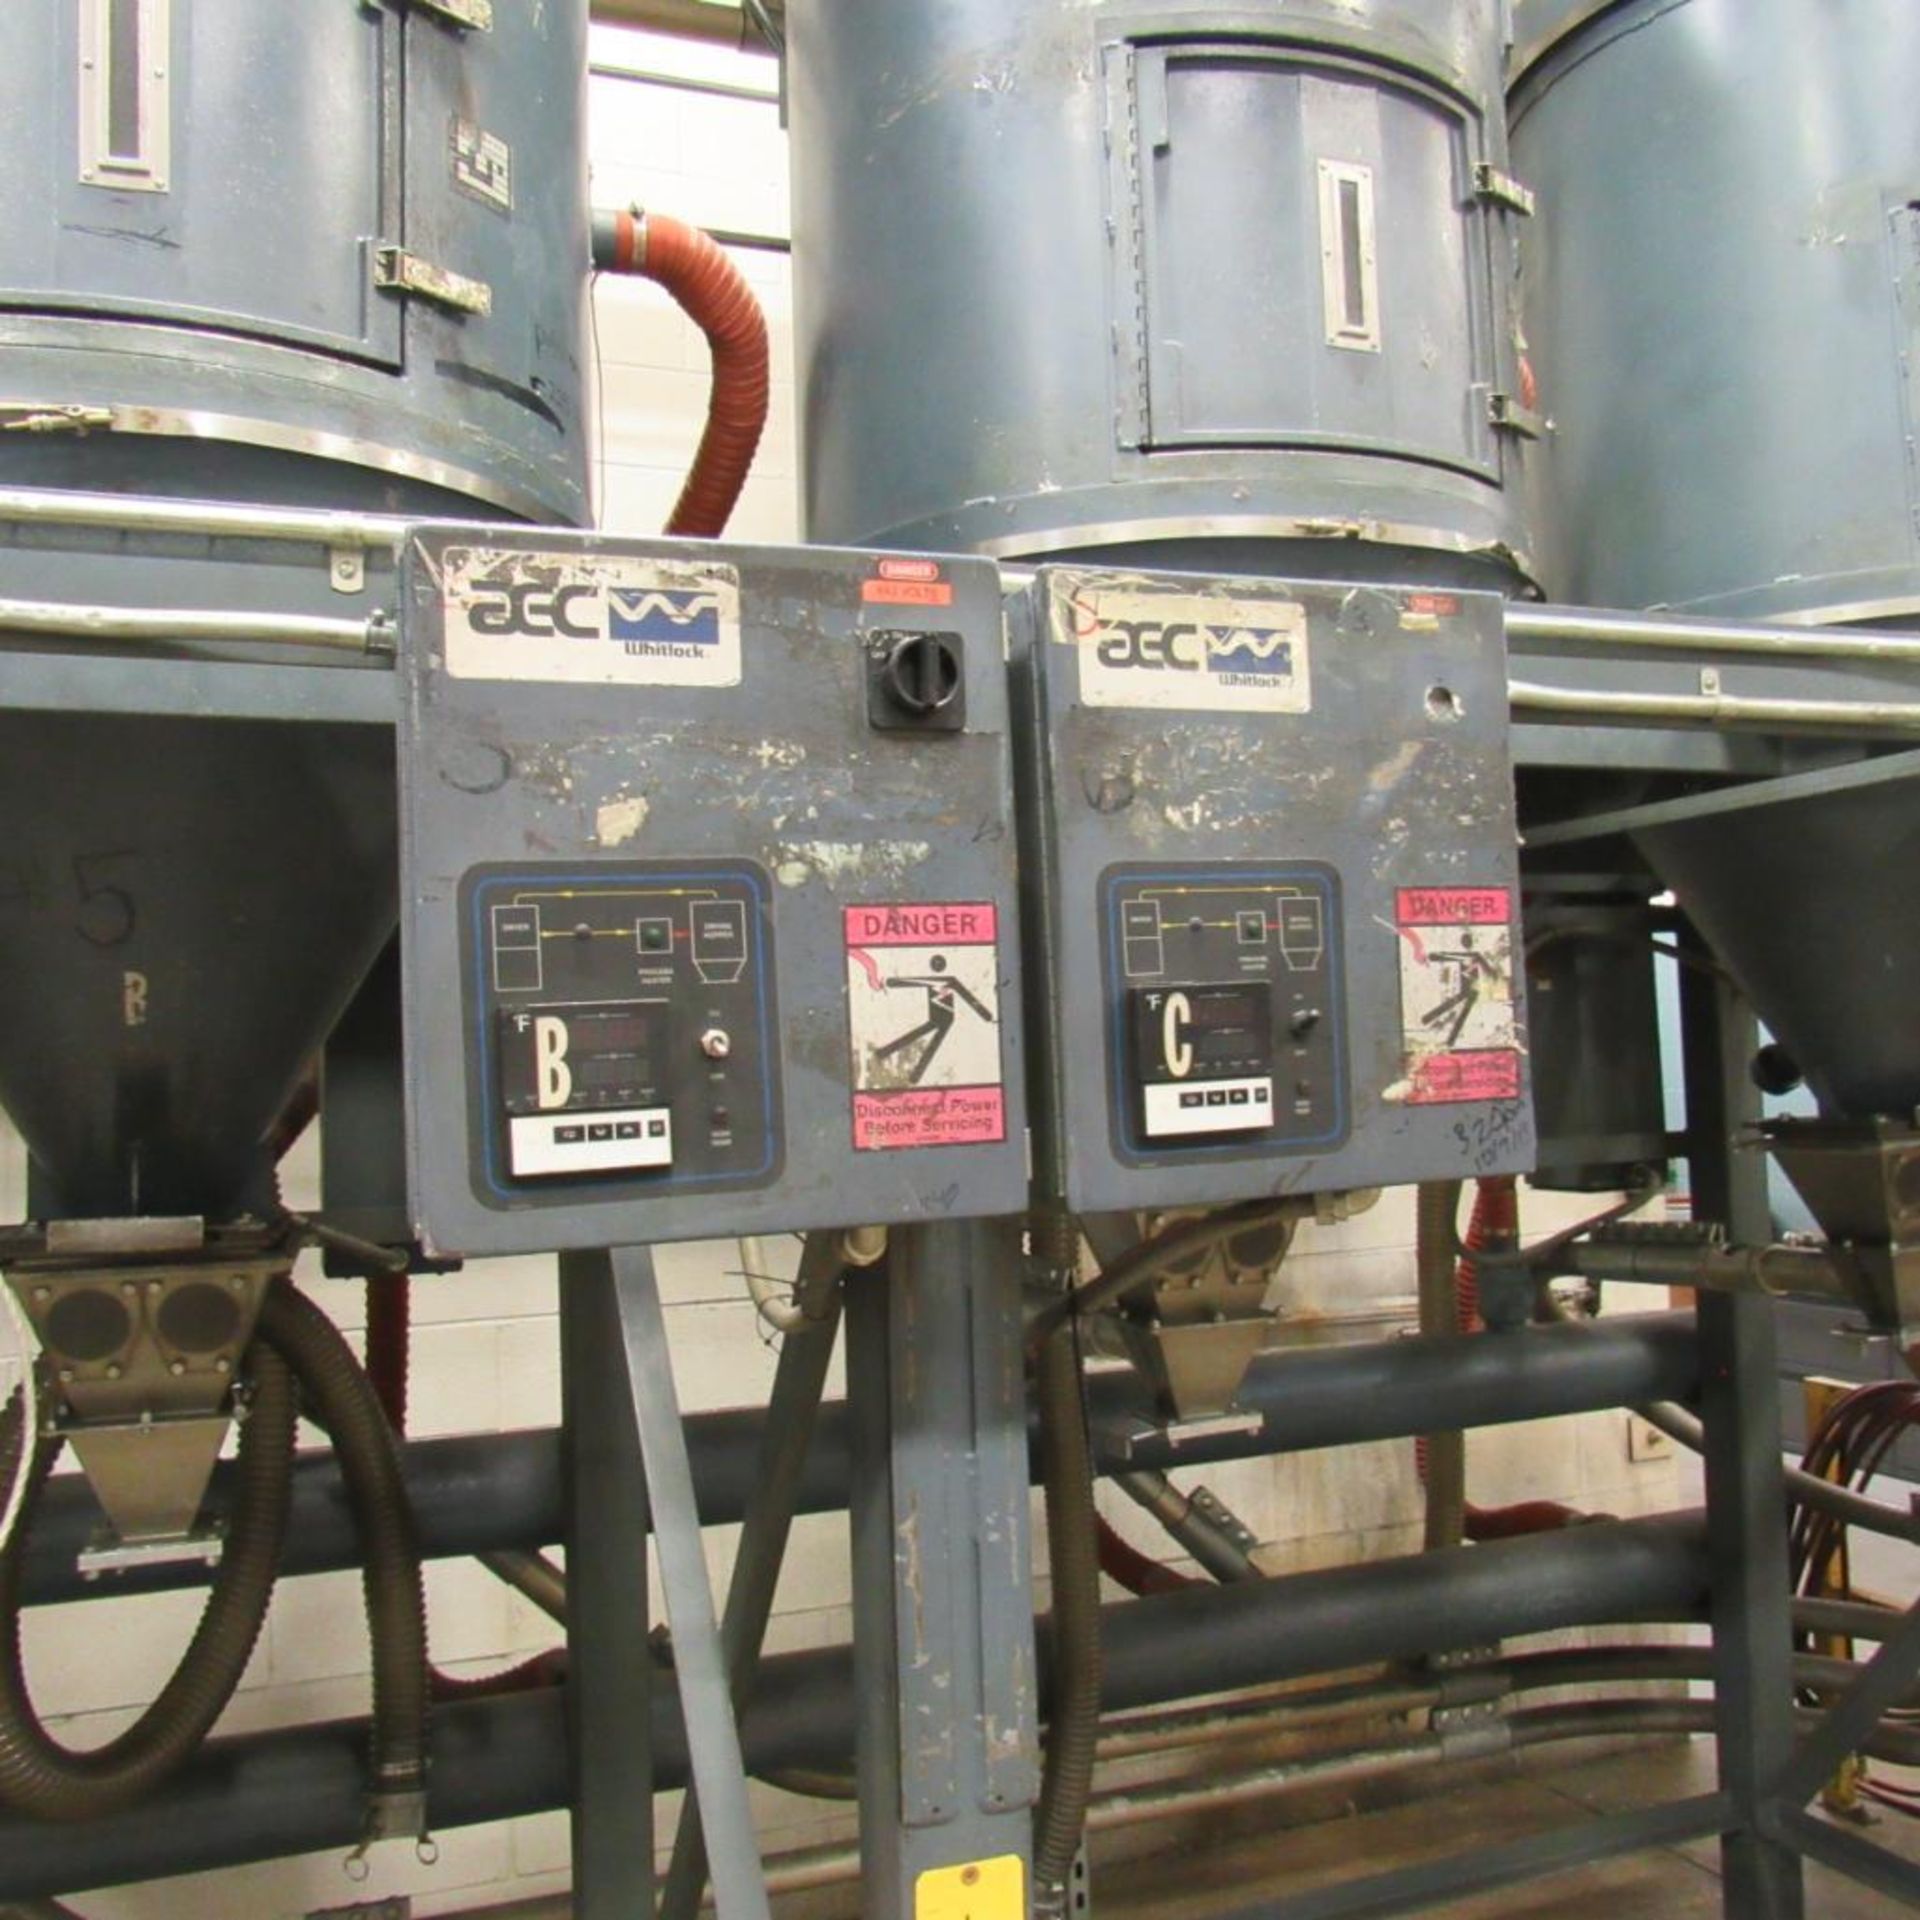 AEC Whitlock WD-600 CHEQ Dryer w/(4) DH-170 MICHEQ Hopper Dryers (Location: Bldg. 1) - Image 8 of 10